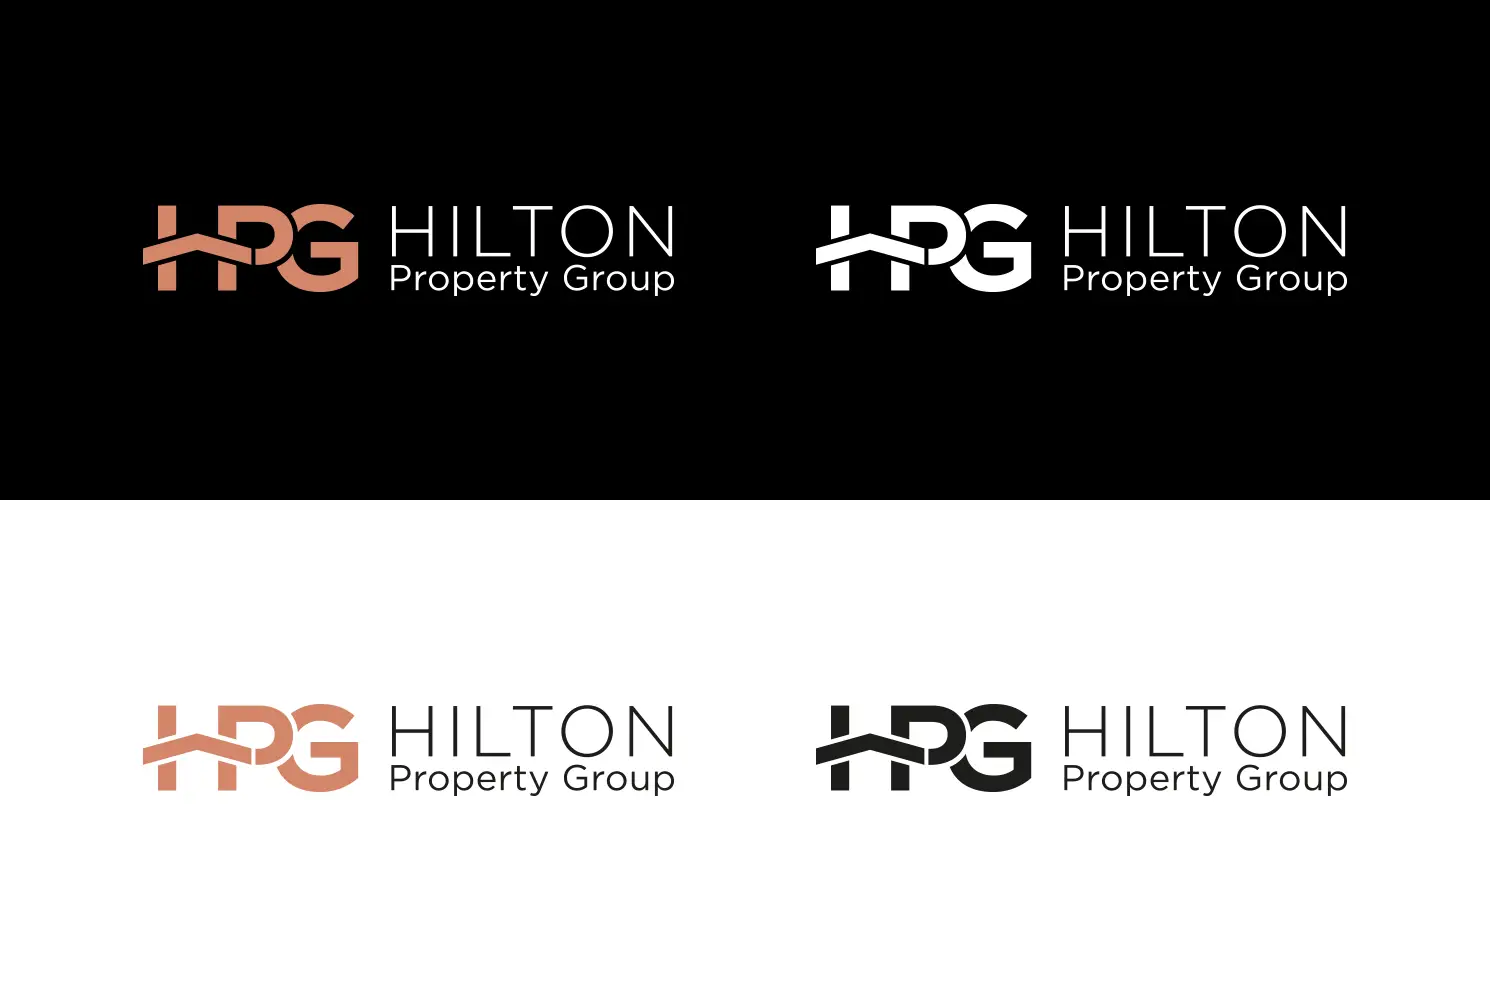 Different colour options for the stacked version of the Hilton Property Group logo